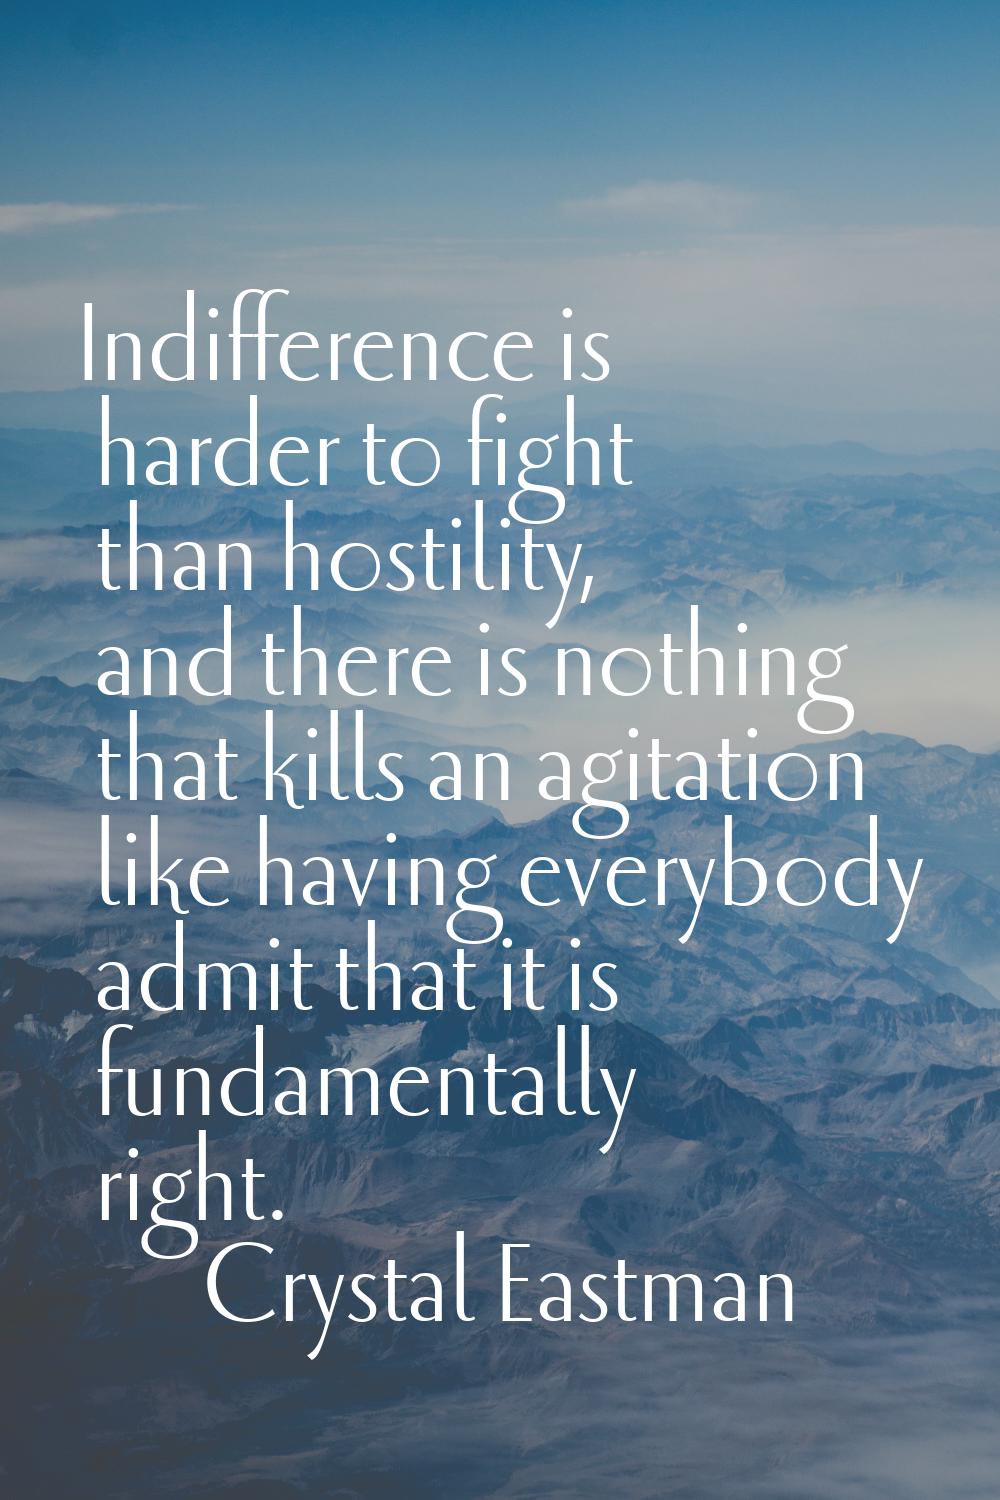 Indifference is harder to fight than hostility, and there is nothing that kills an agitation like h